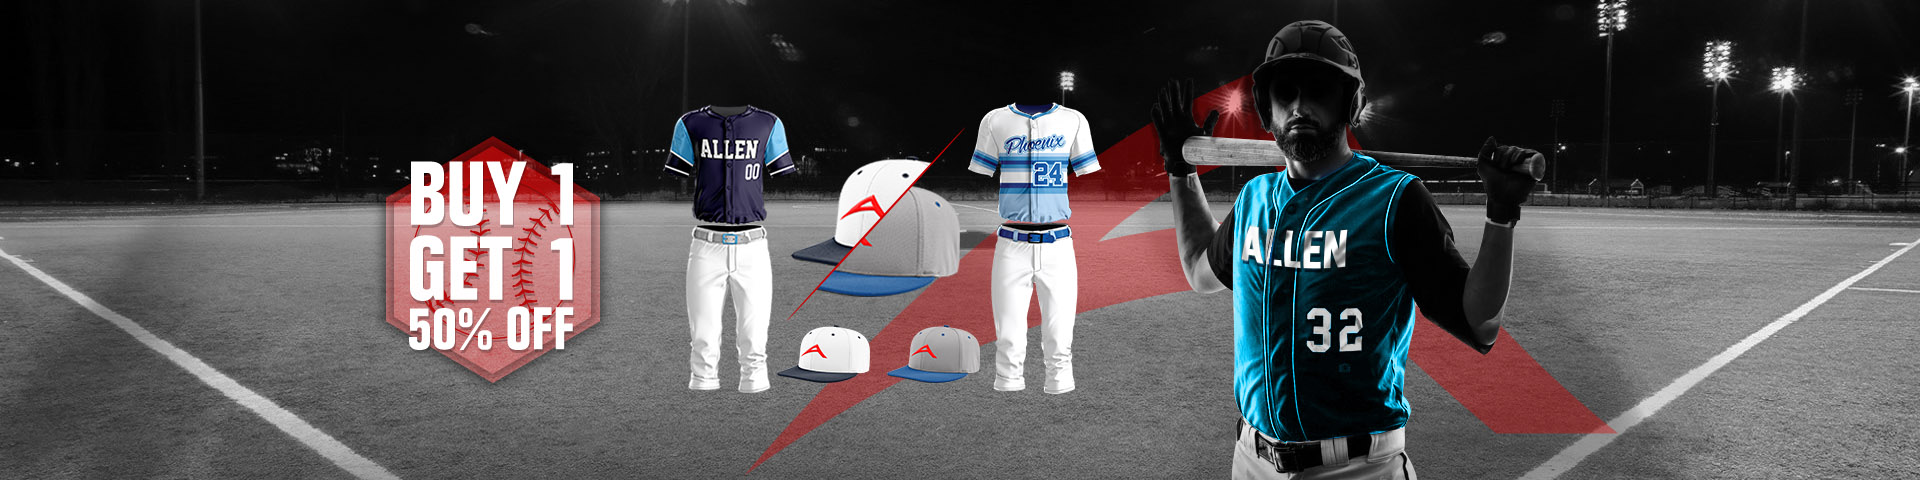 Custom Baseball Uniforms Packages for Youth – Sport Uniform